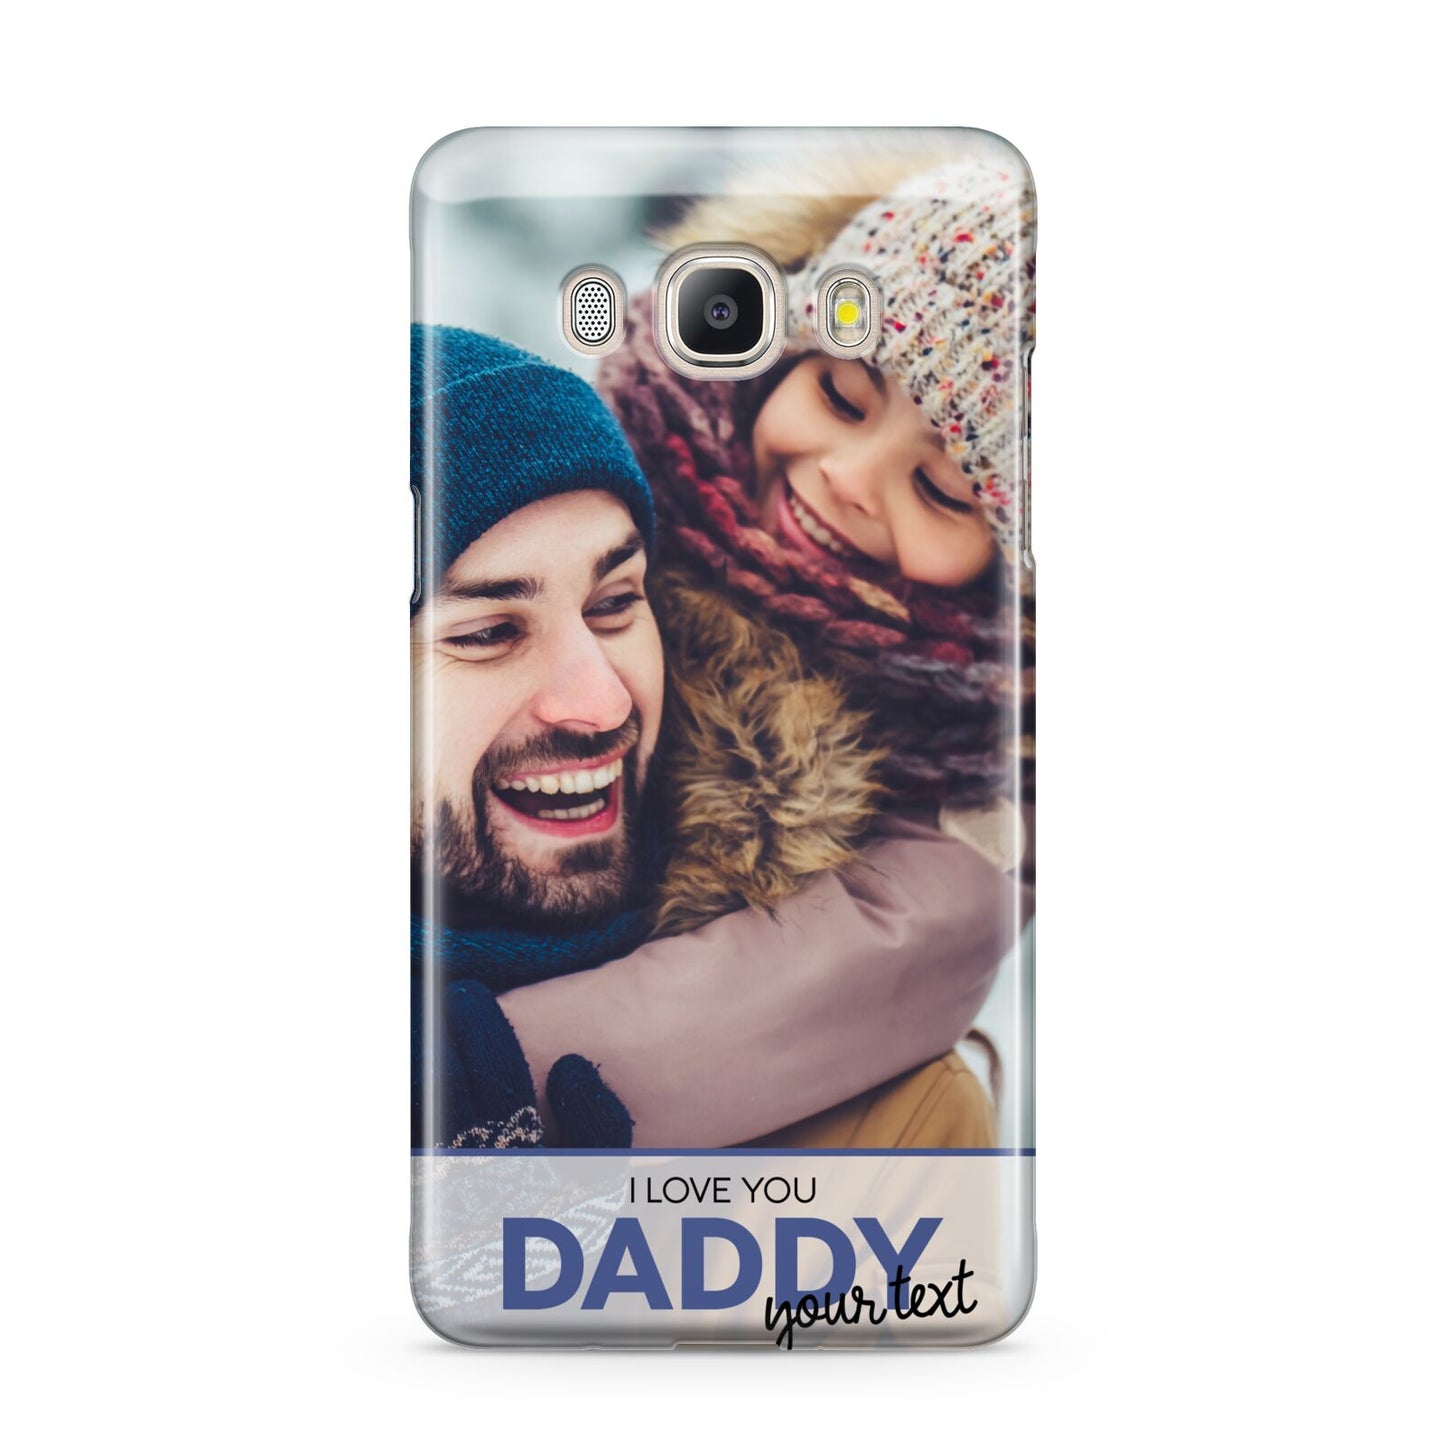 I Love You Daddy Personalised Photo Upload and Name Samsung Galaxy J5 2016 Case